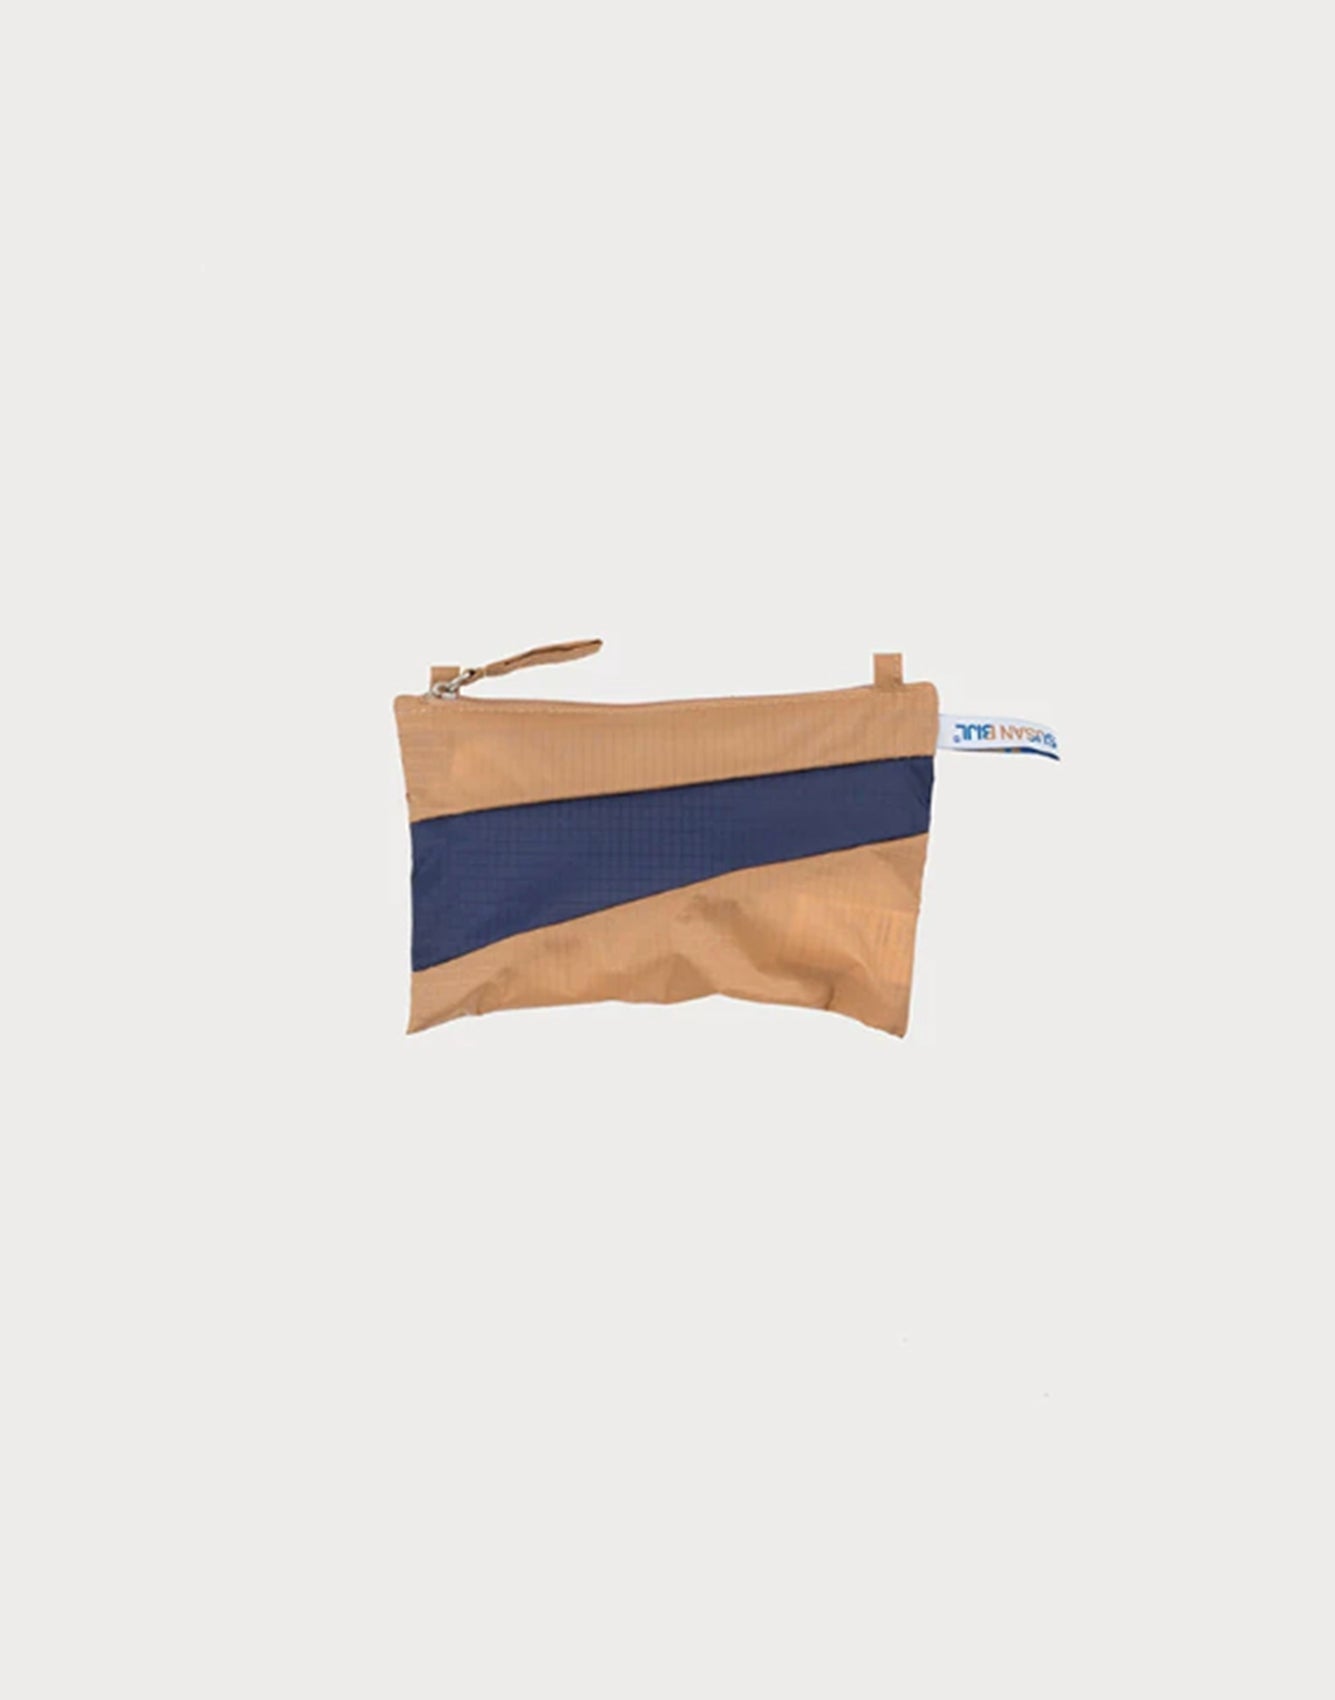 Susan Bijl The New Pouch Camel&Navy Small